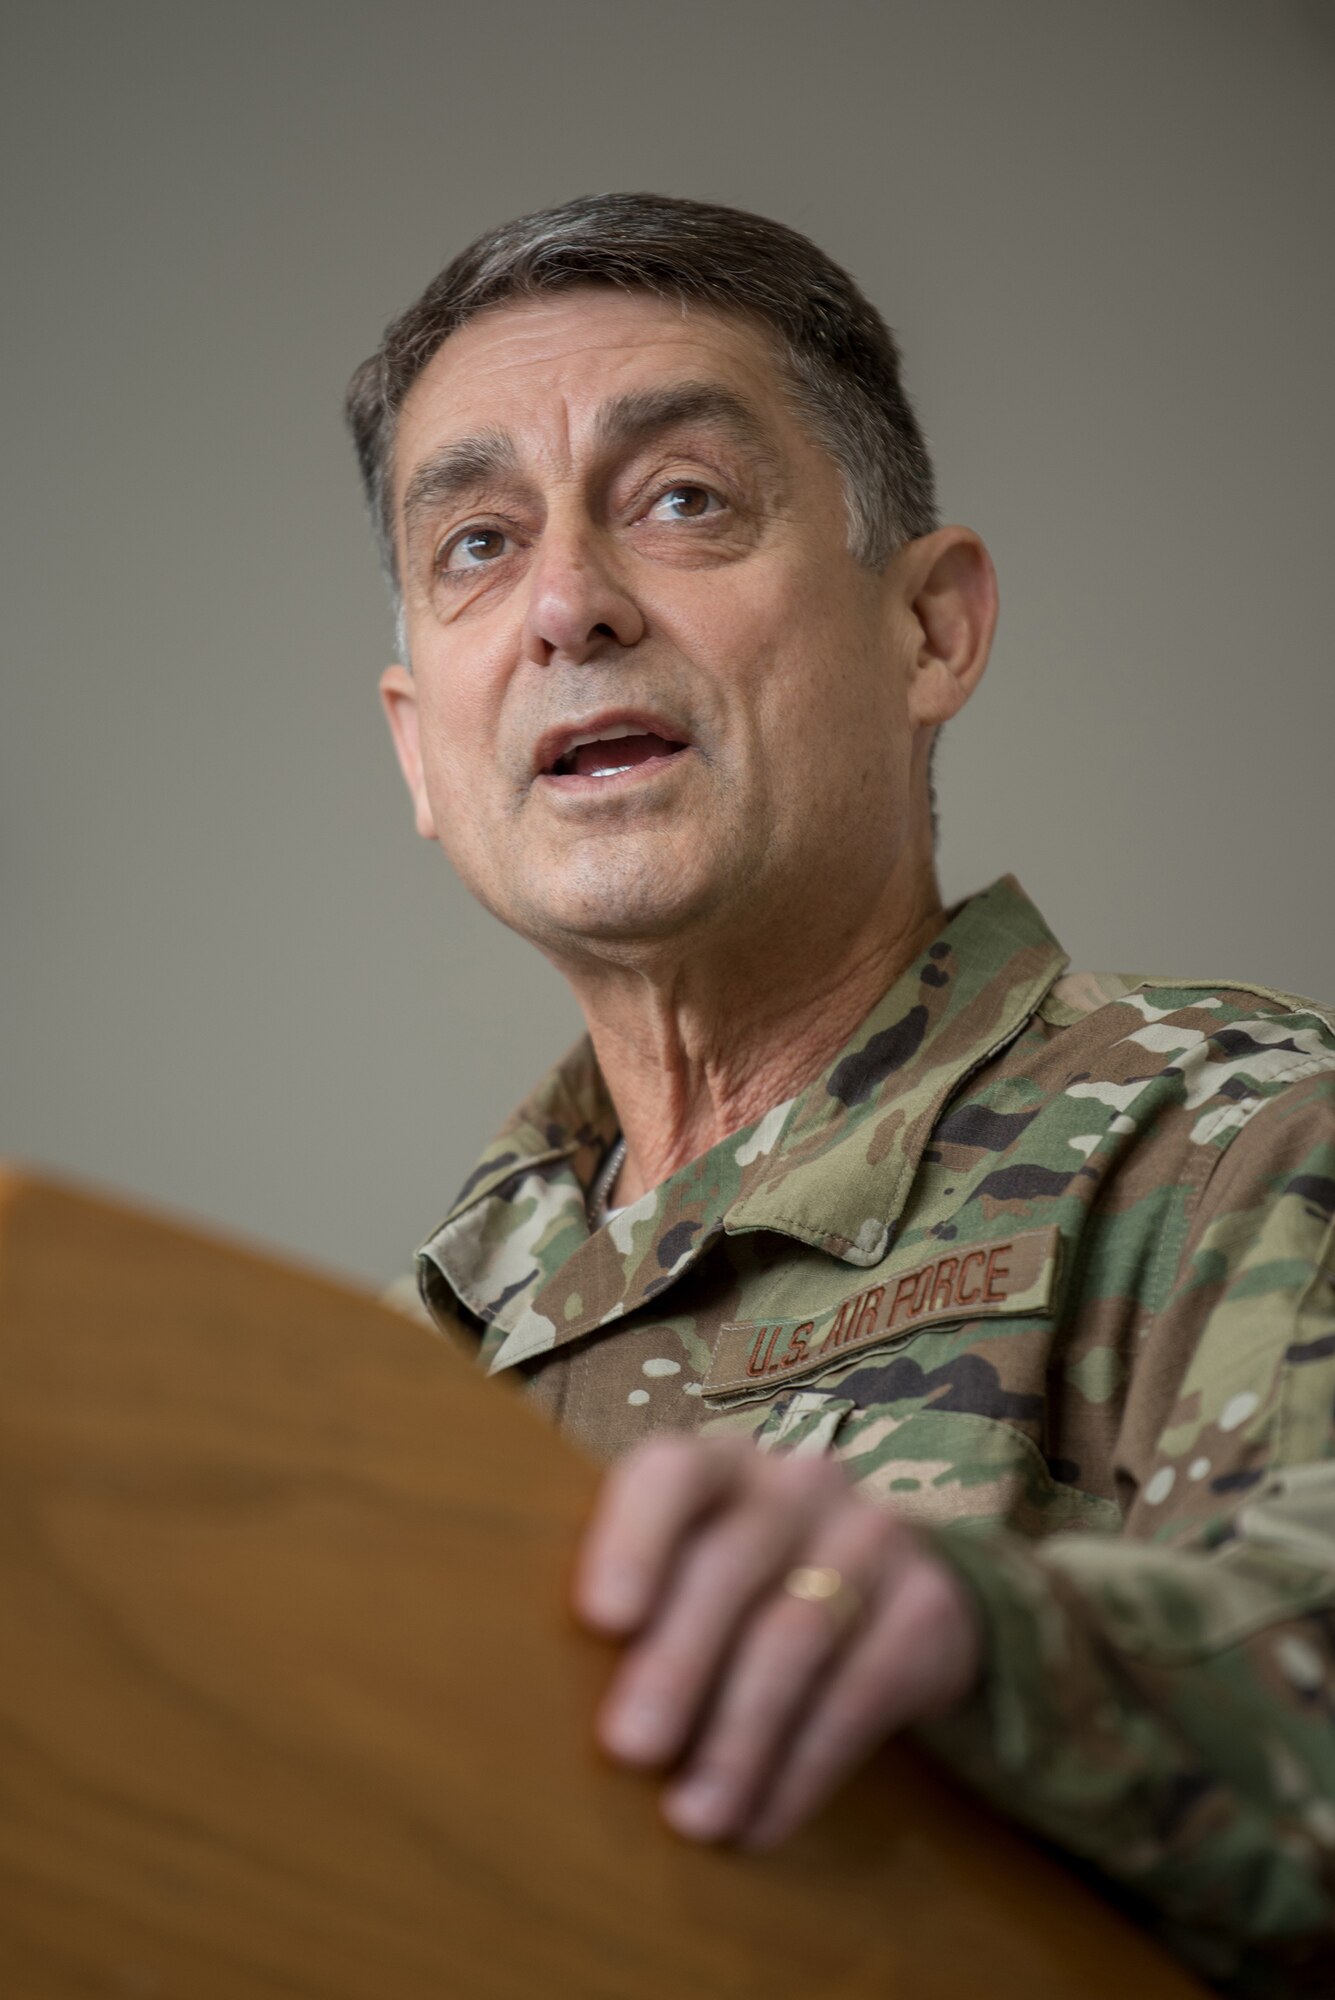 Brig. Gen. Warren Hurst, Kentucky’s assistant adjutant general for Air, speaks to members of the 123rd Airlift Wing during a ceremony at the Kentucky Air National Guard Base in Louisville, Ky., March 10, 2019. The ceremony, which highlighted the unit’s accomplishments during the past year, concluded with the presentation of the wing’s 18th Air Force Outstanding Unit Award. (U.S. Air National Guard photo by Staff Sgt. Joshua Horton)